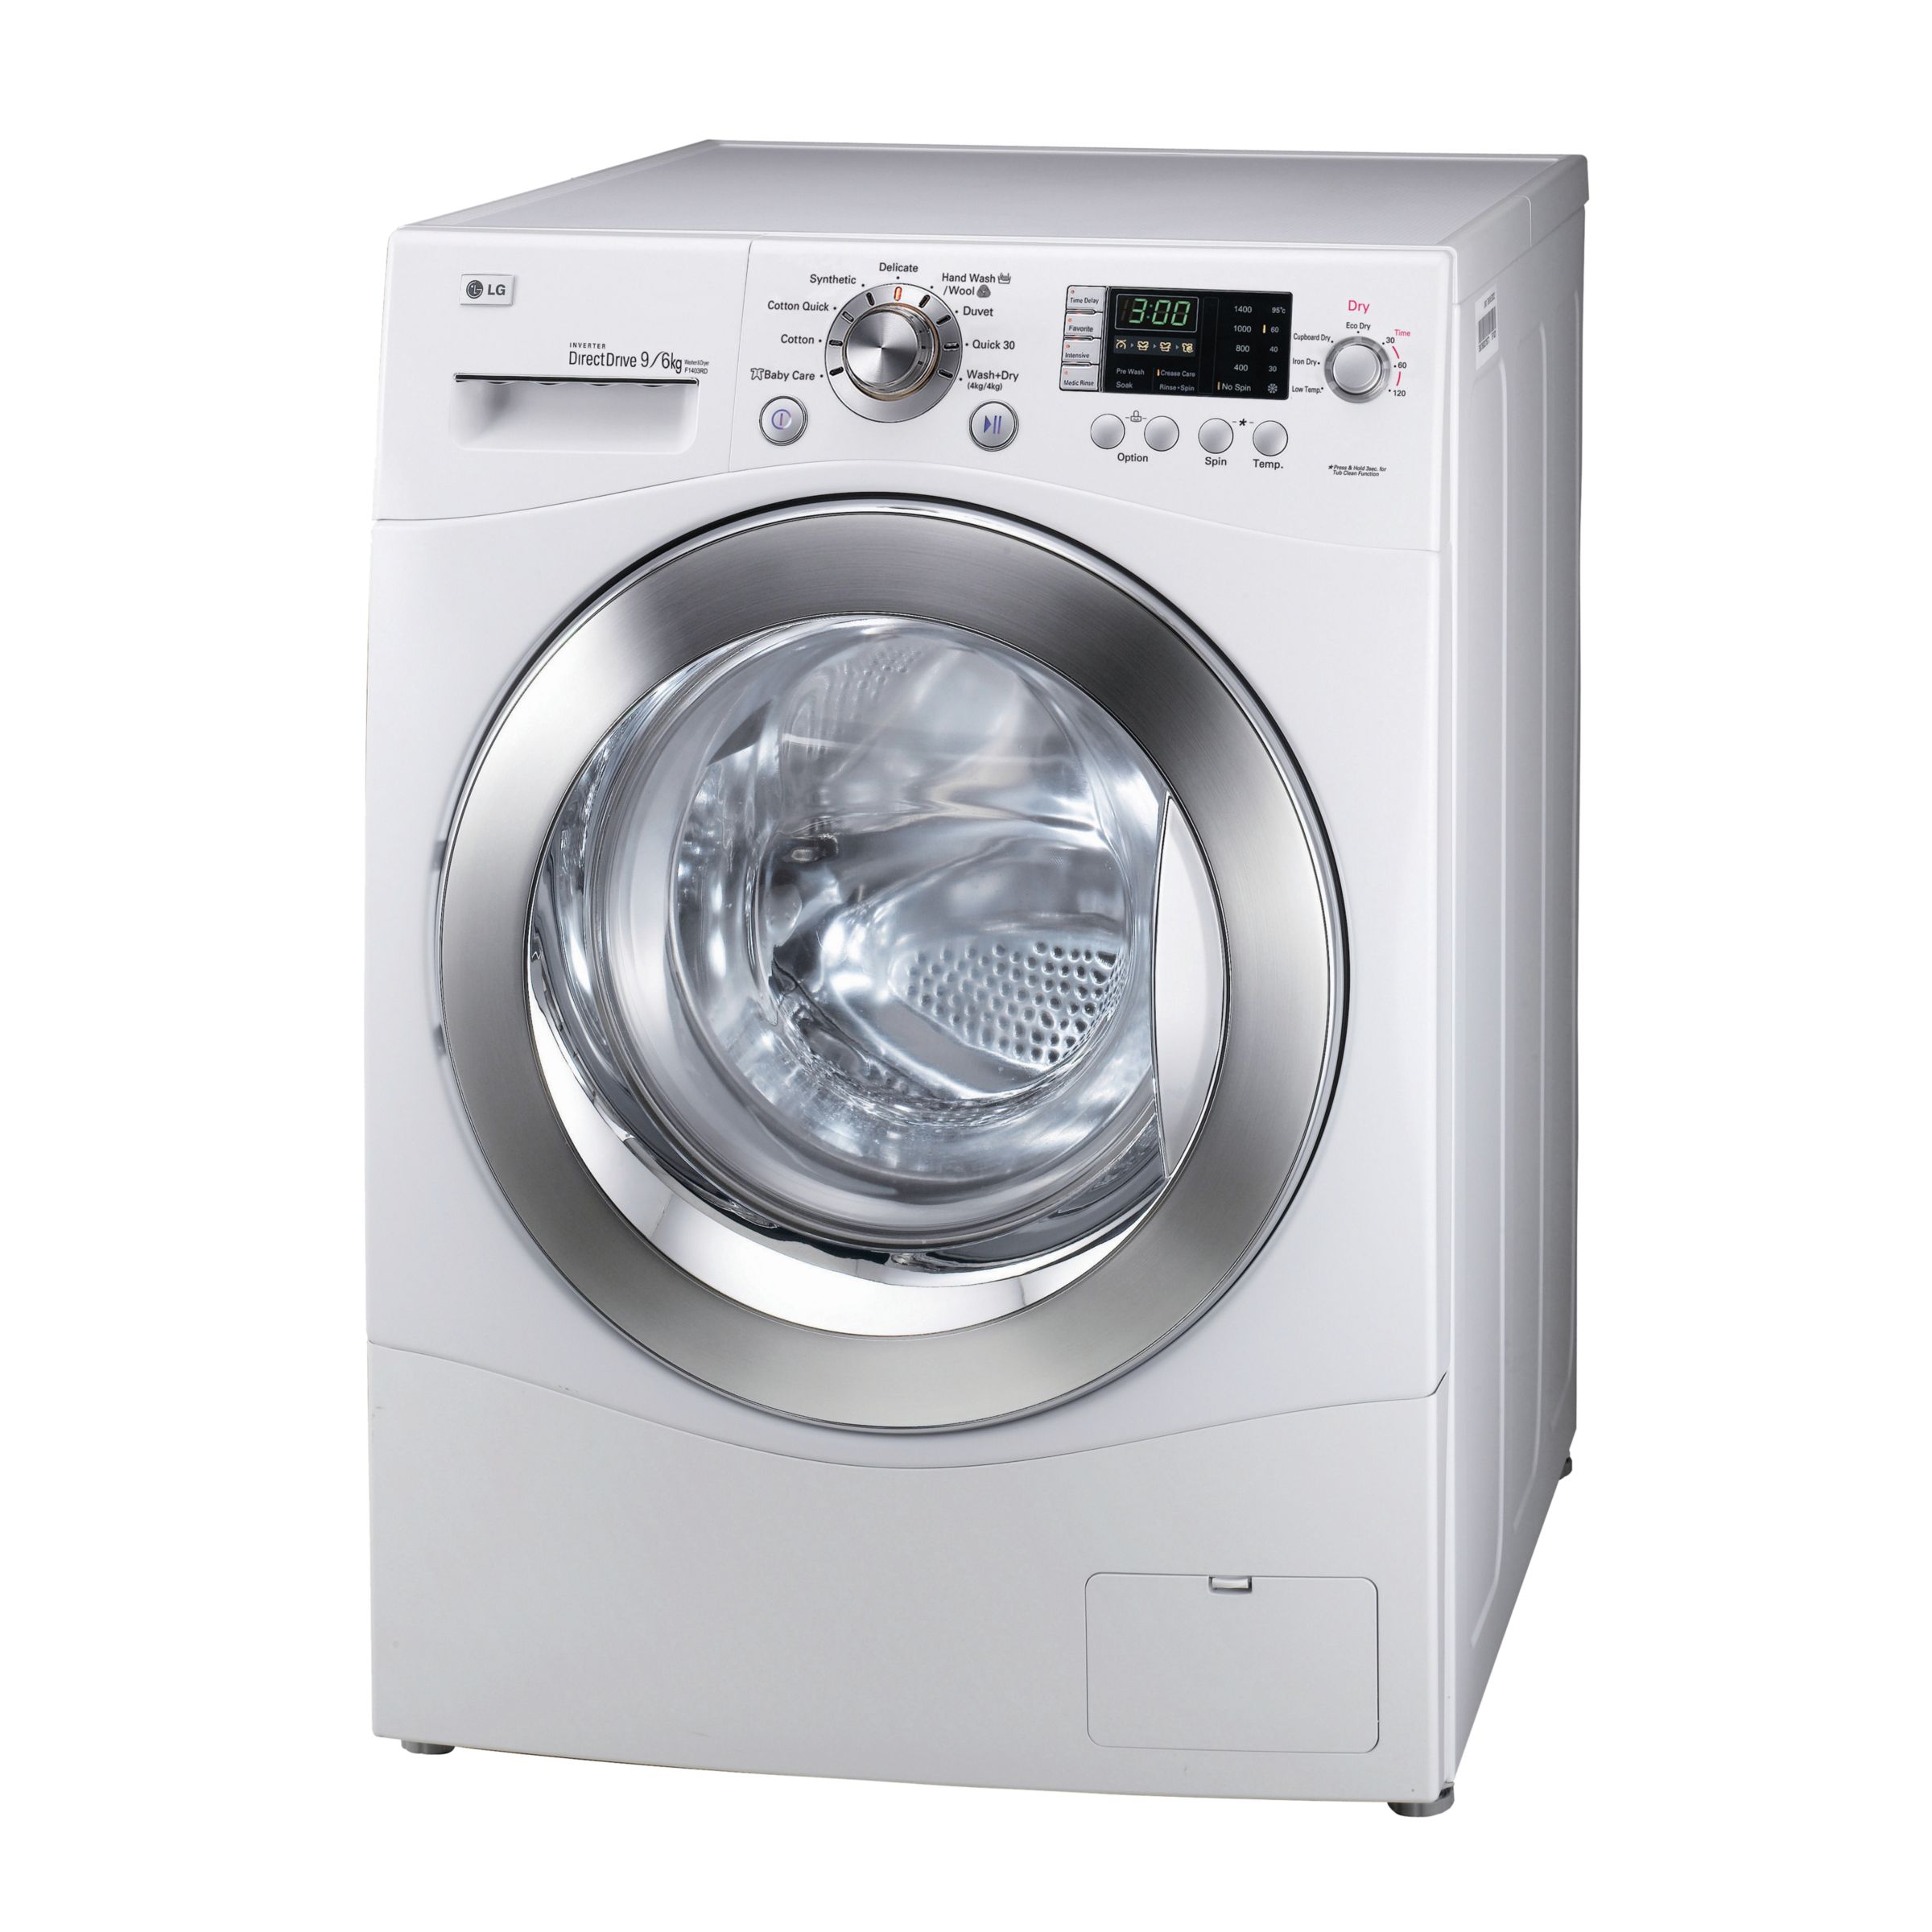 LG F1403RD Direct Drive Washer Dryer, White at John Lewis